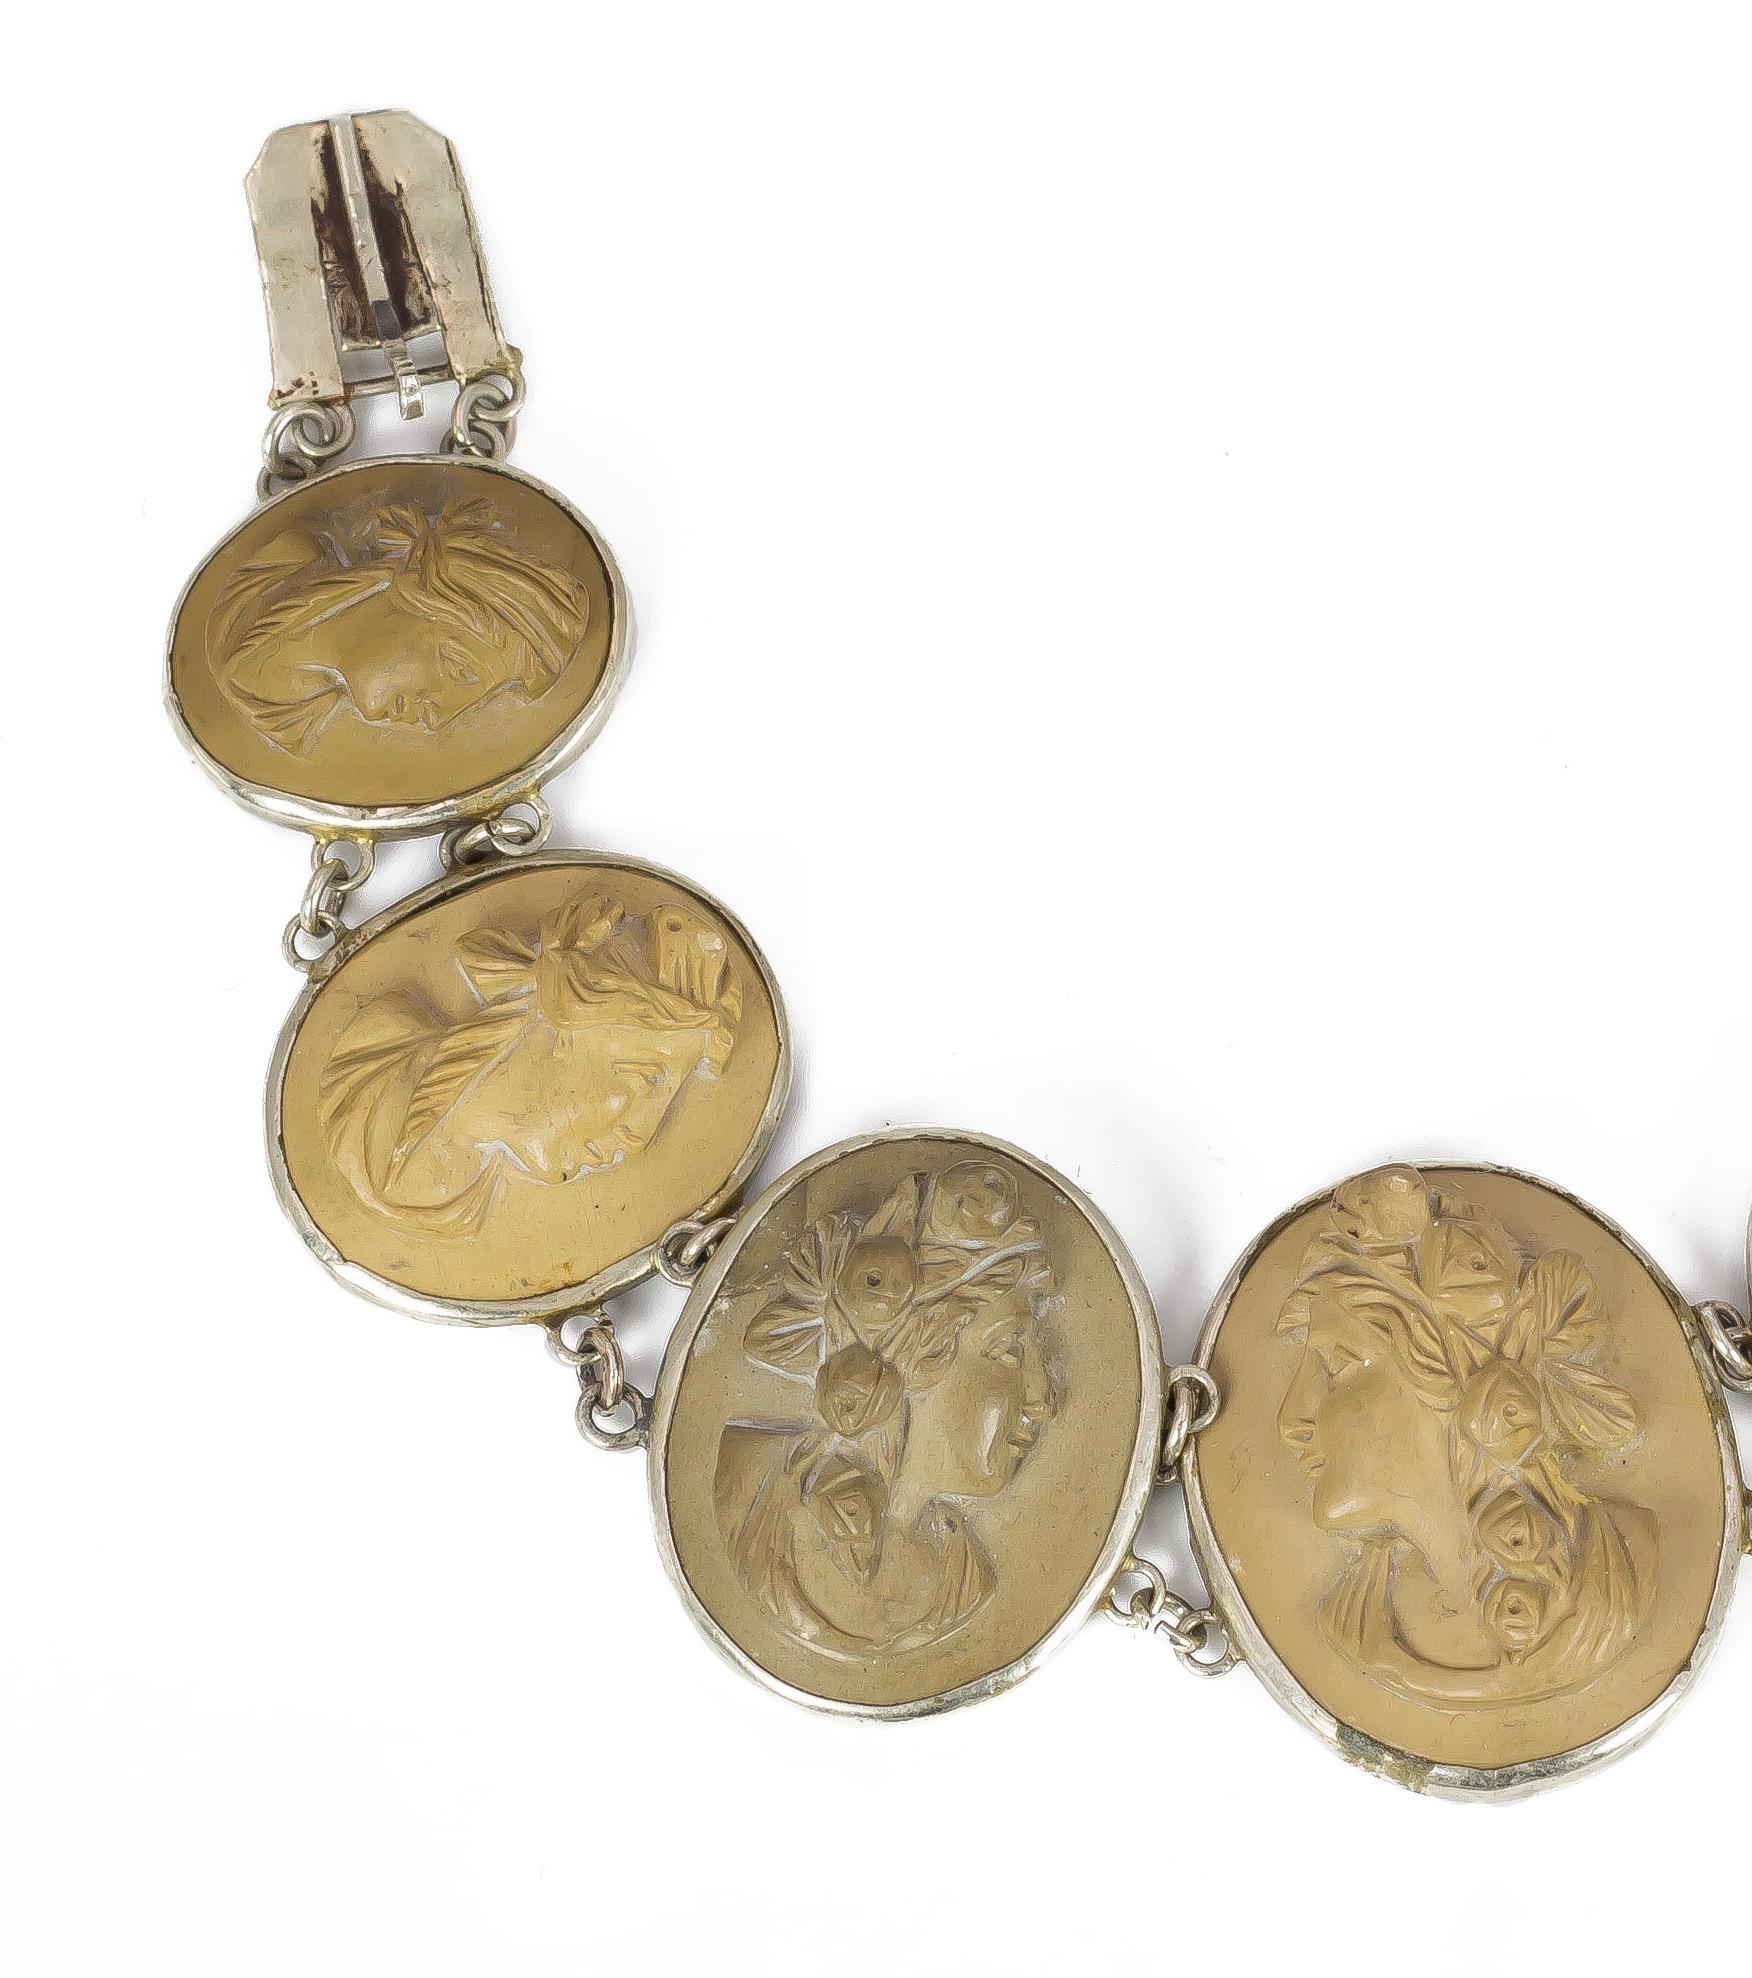 A stunning antique bracelet, decorated with seven oval lava cameos, all in different colours and shades: each one depicts the profile of a beautiful woman, with collected hair, and some of them with floral decorations in their hair. The cameos are